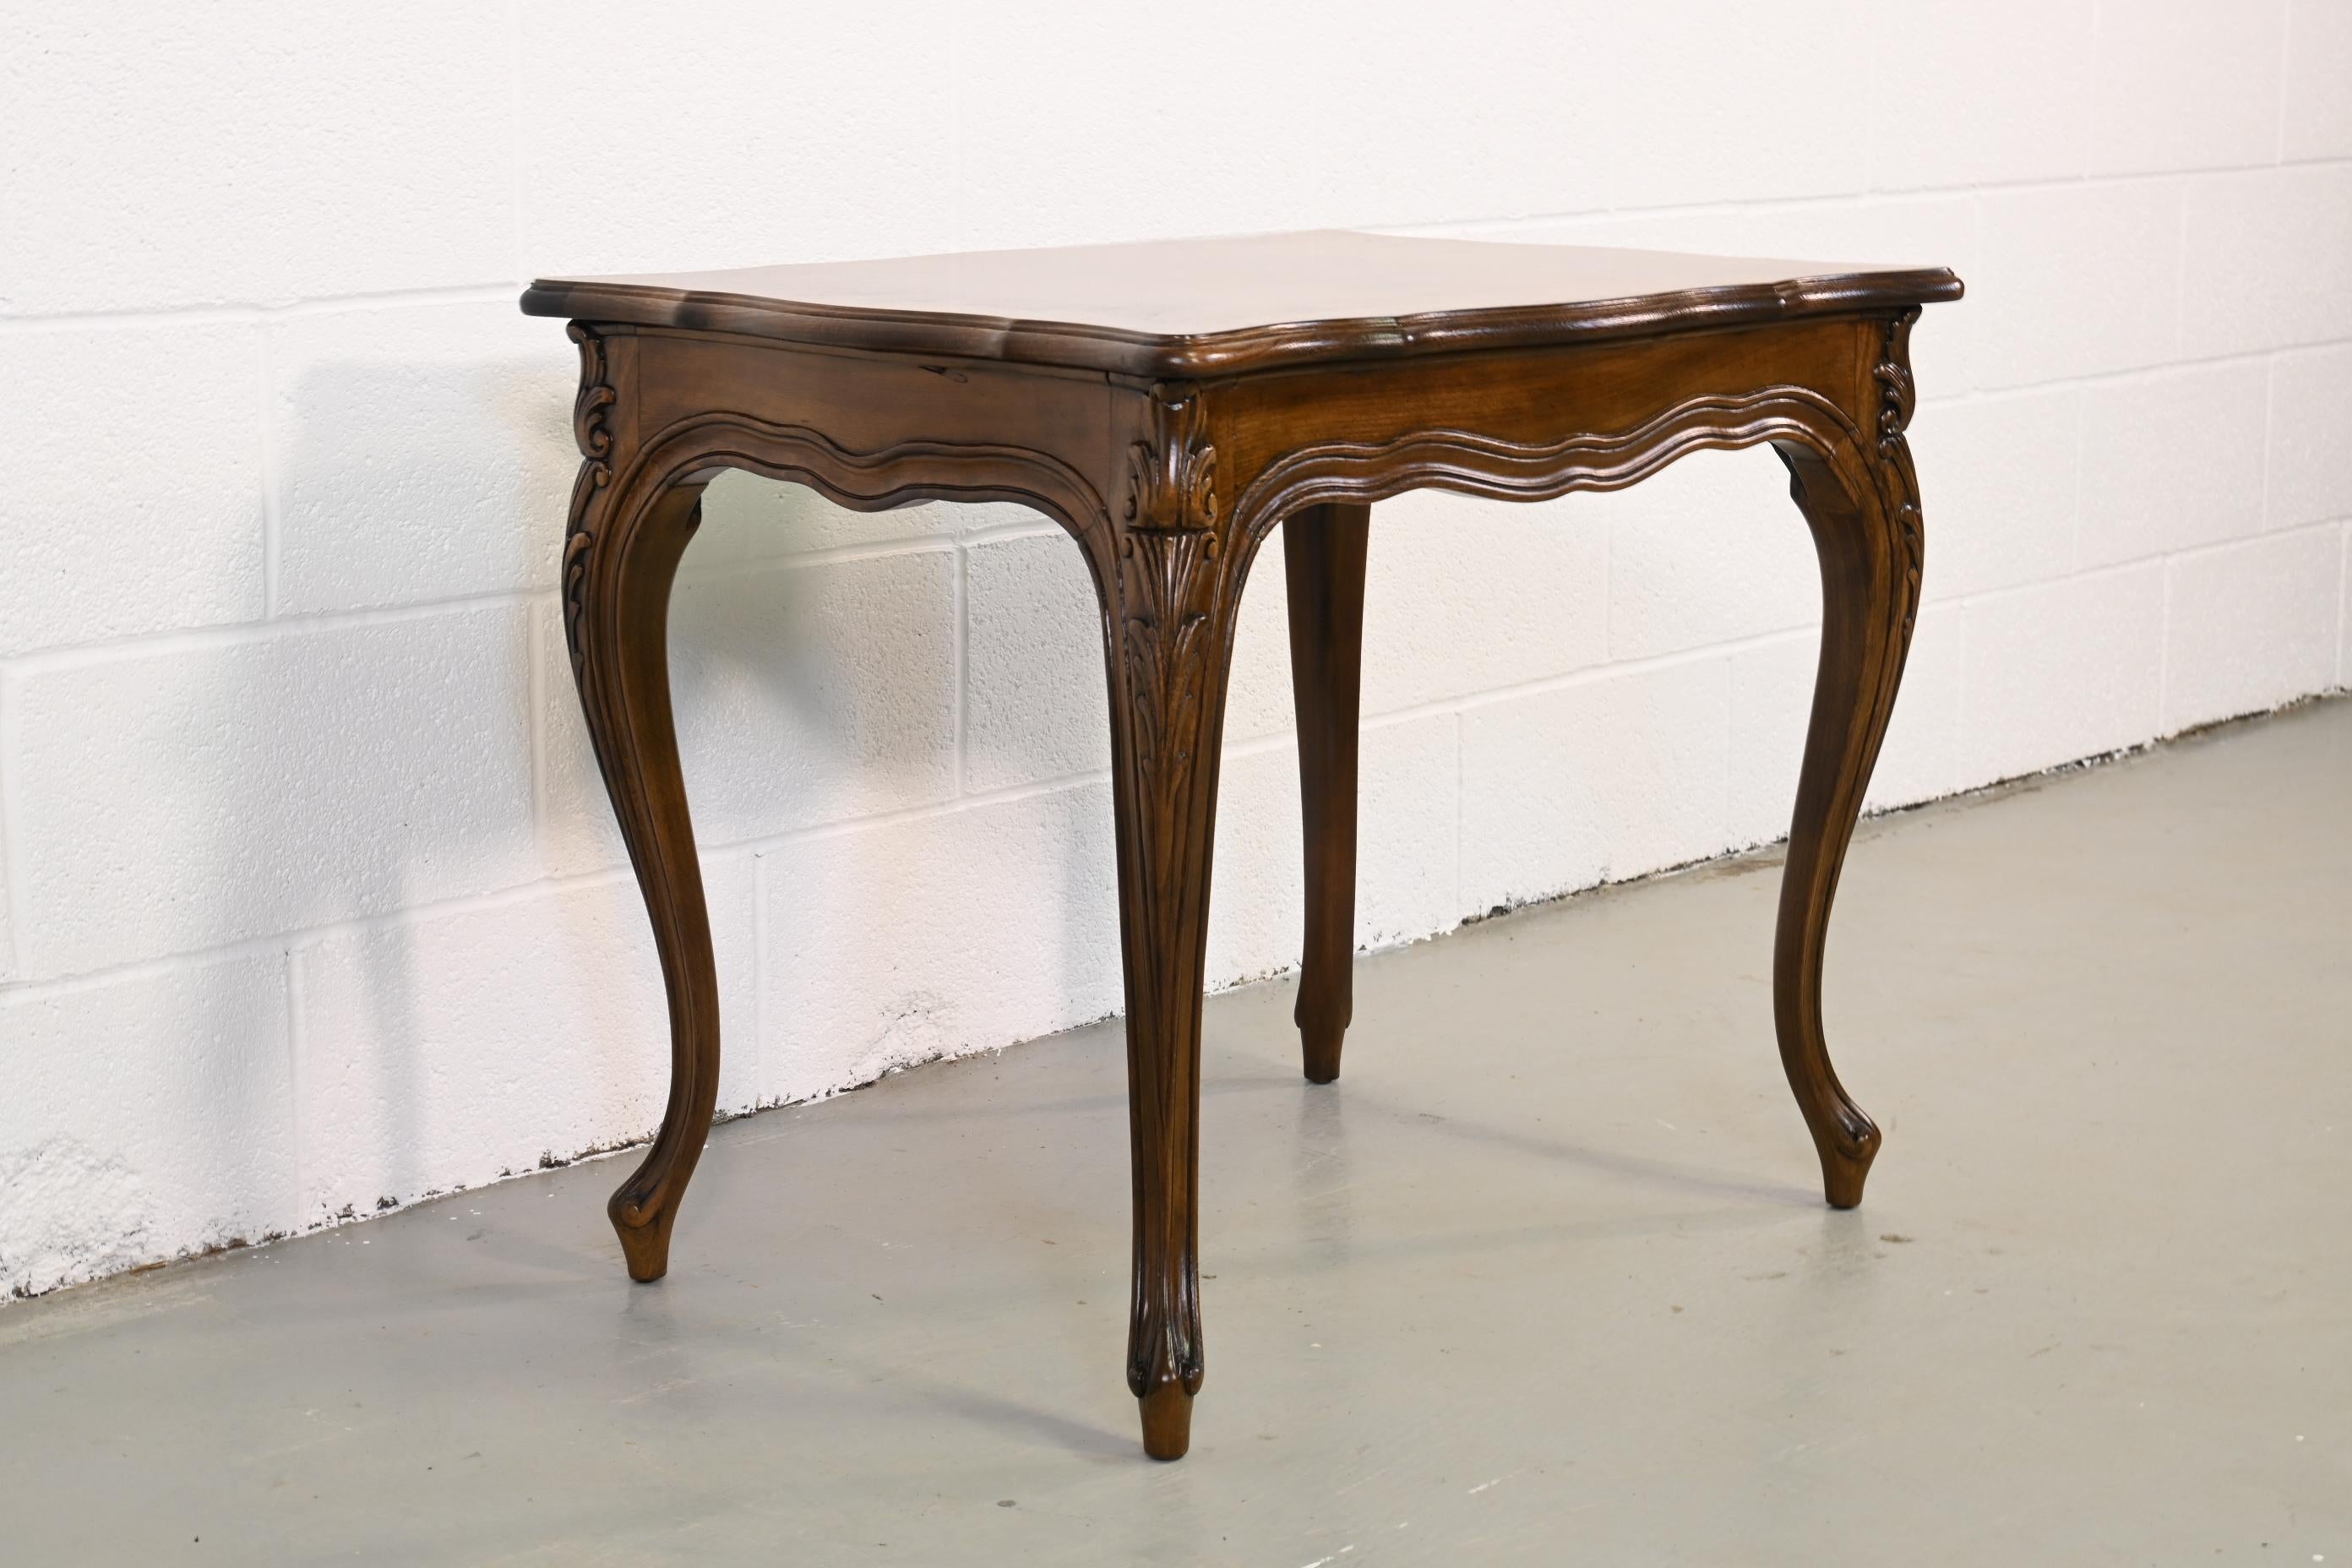 Karges Furniture French Provincial Burled Walnut End Tables - a Pair For Sale 5